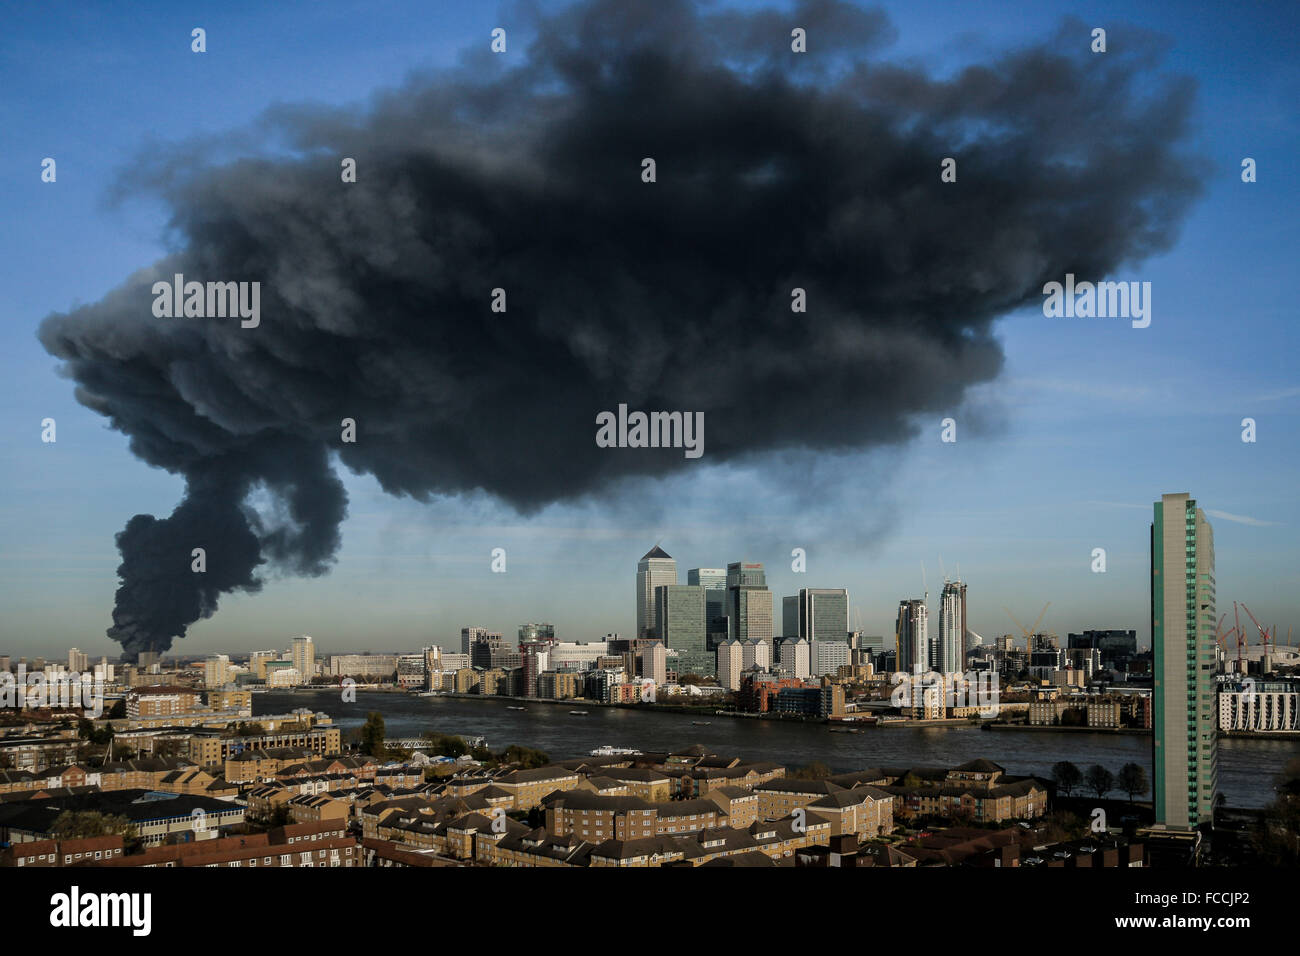 Black smoke cloud seen over Canary Wharf from a warehouse fire in east London, UK. Stock Photo